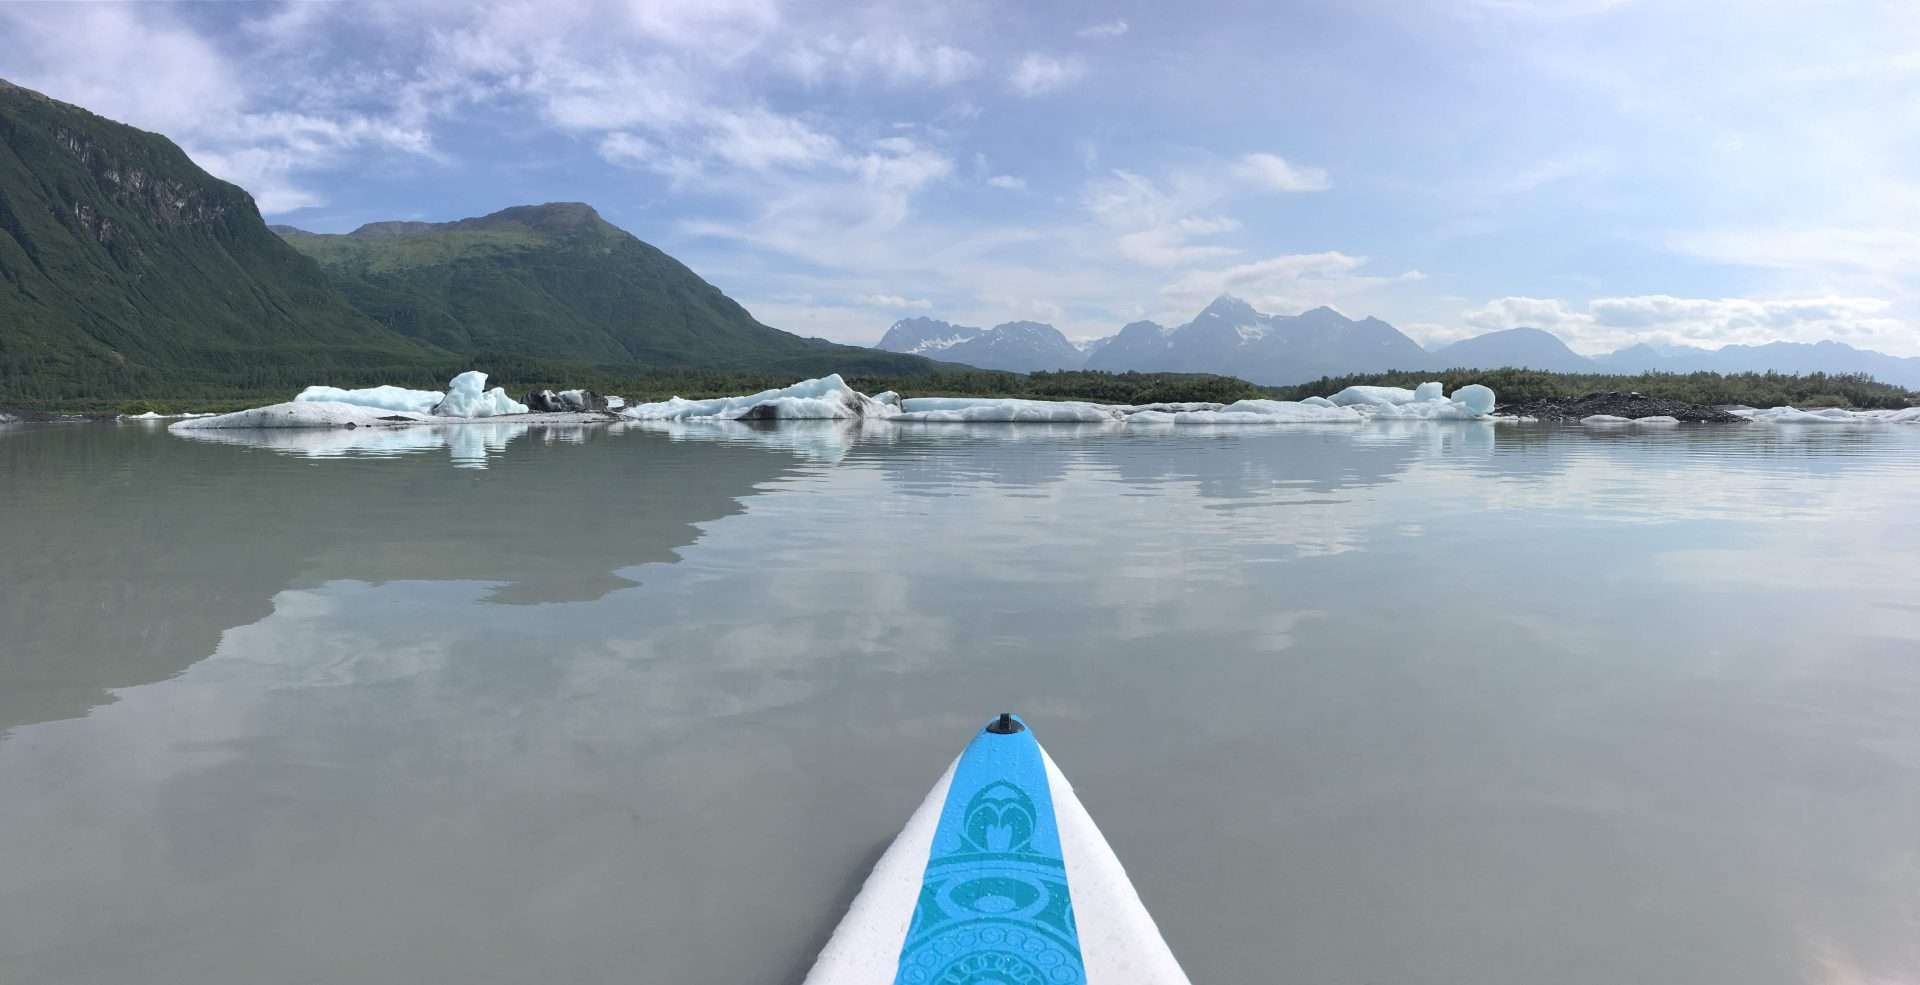 Kayak in front of glaciers